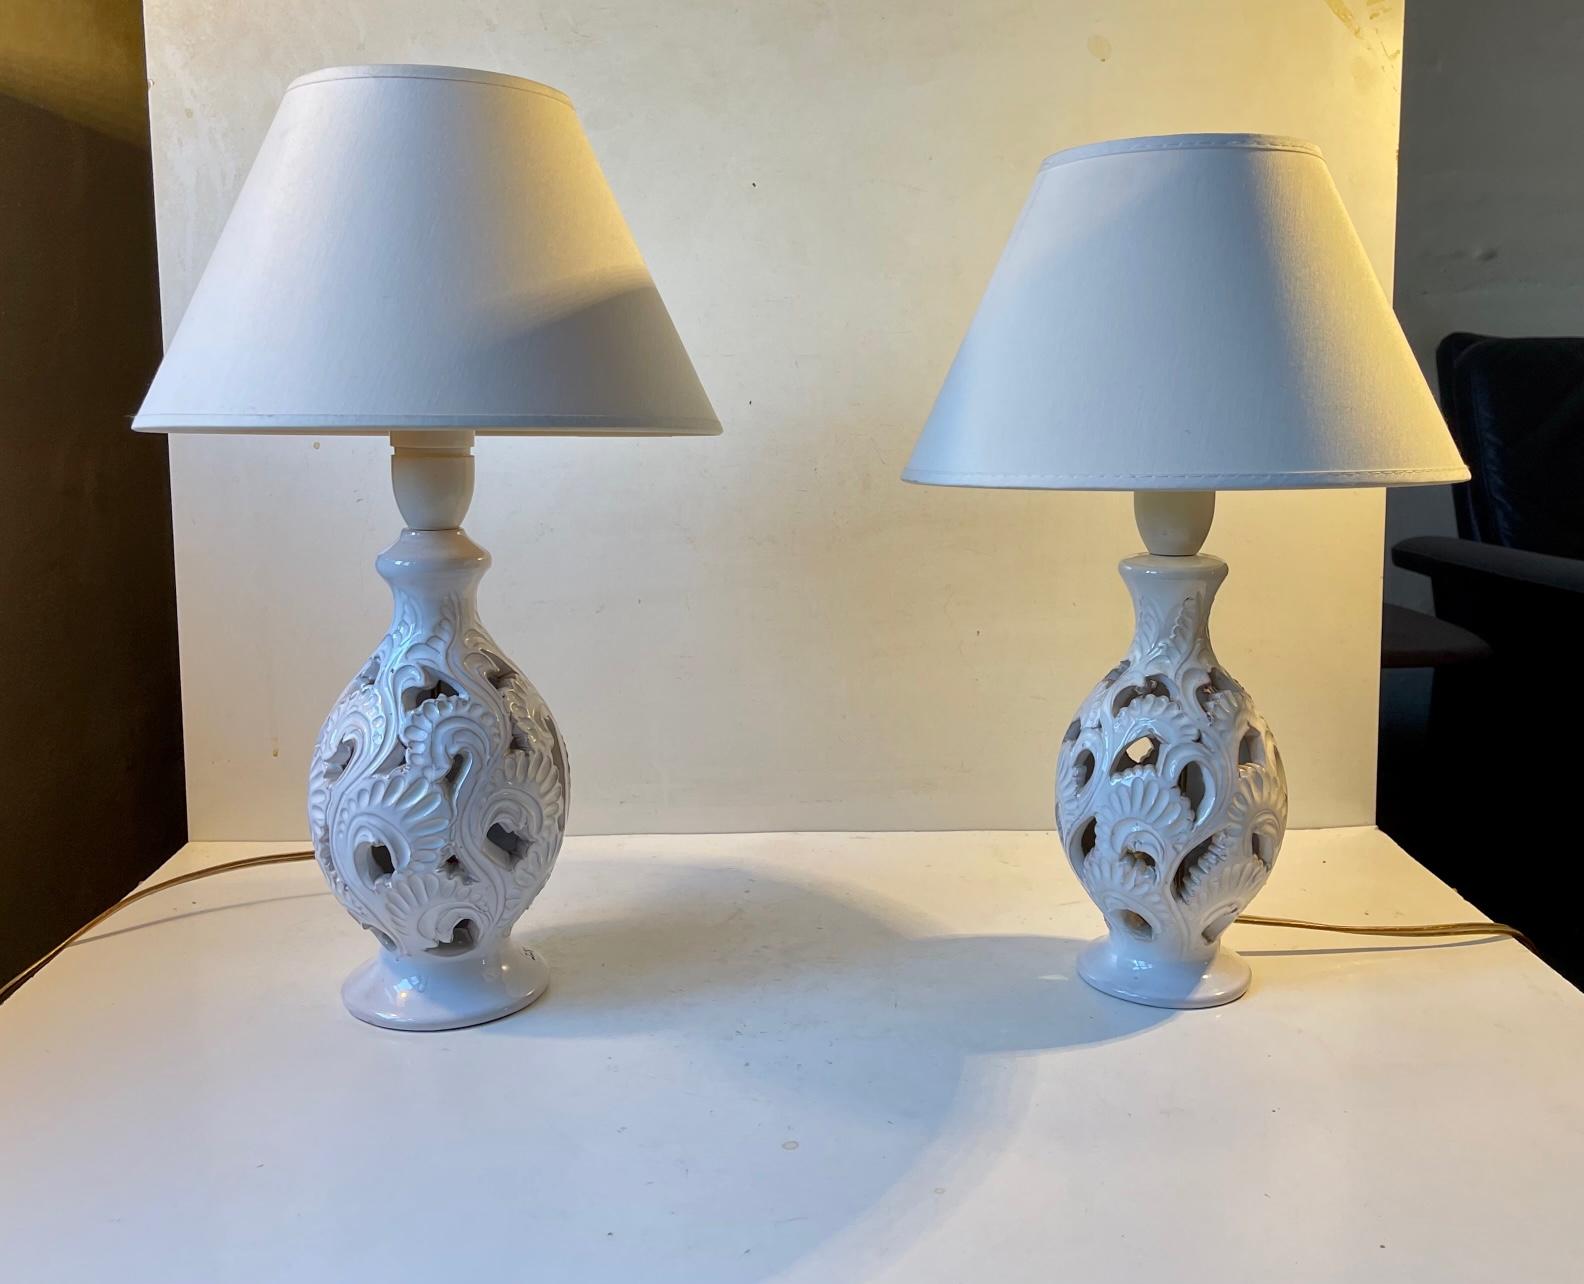 Glazed White Relief Ceramic Table Lamps by Hans Rudolf Petersen, 1940s, Set of 2 For Sale